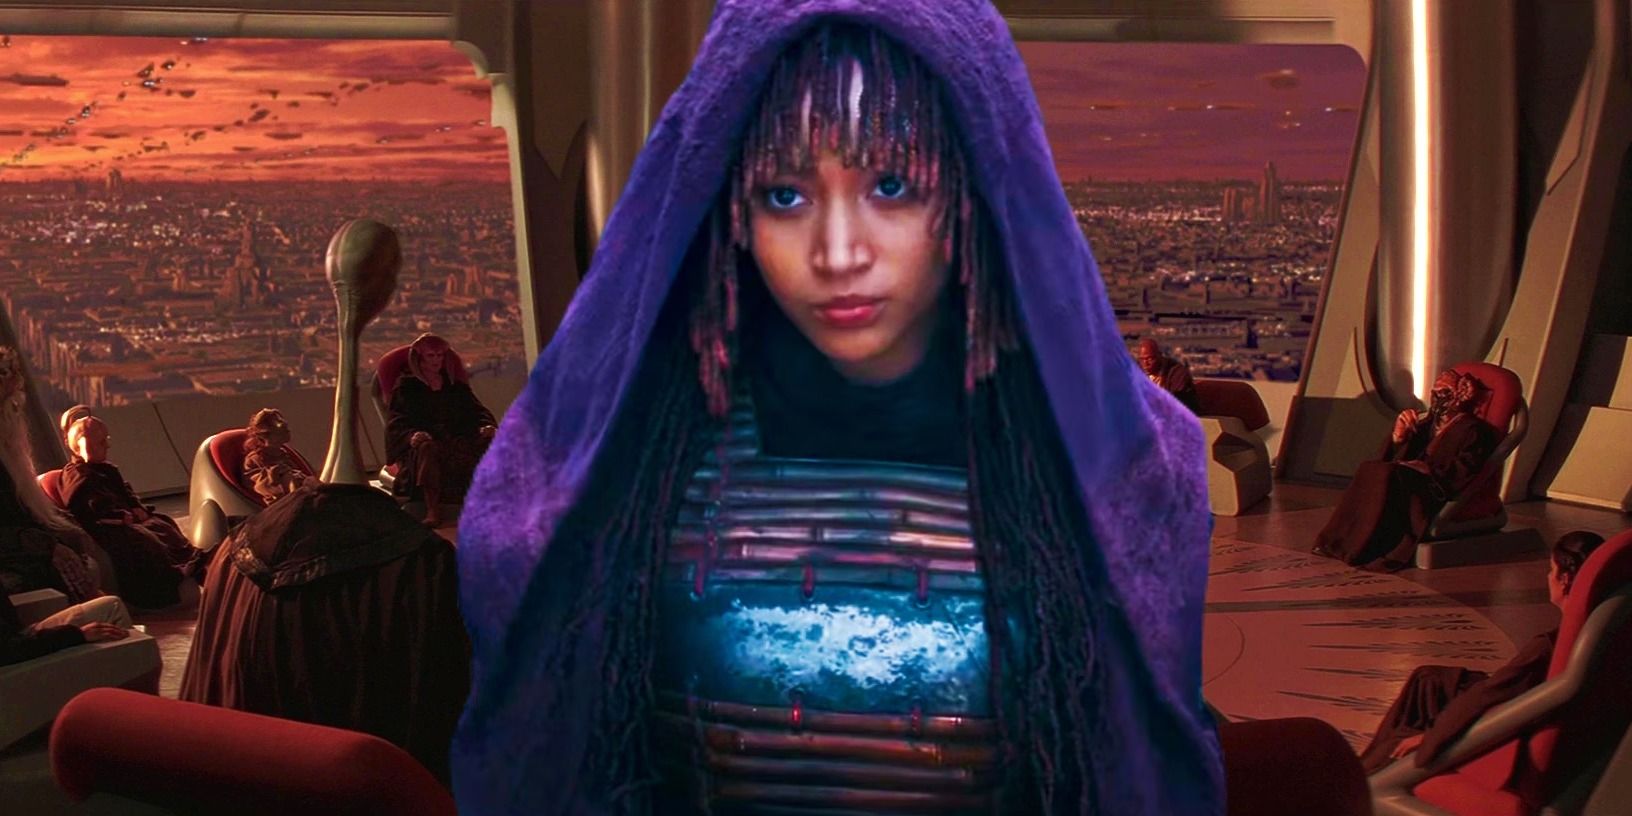 Mae from The Acolyte trailer in front of the Jedi Council from the prequel trilogy